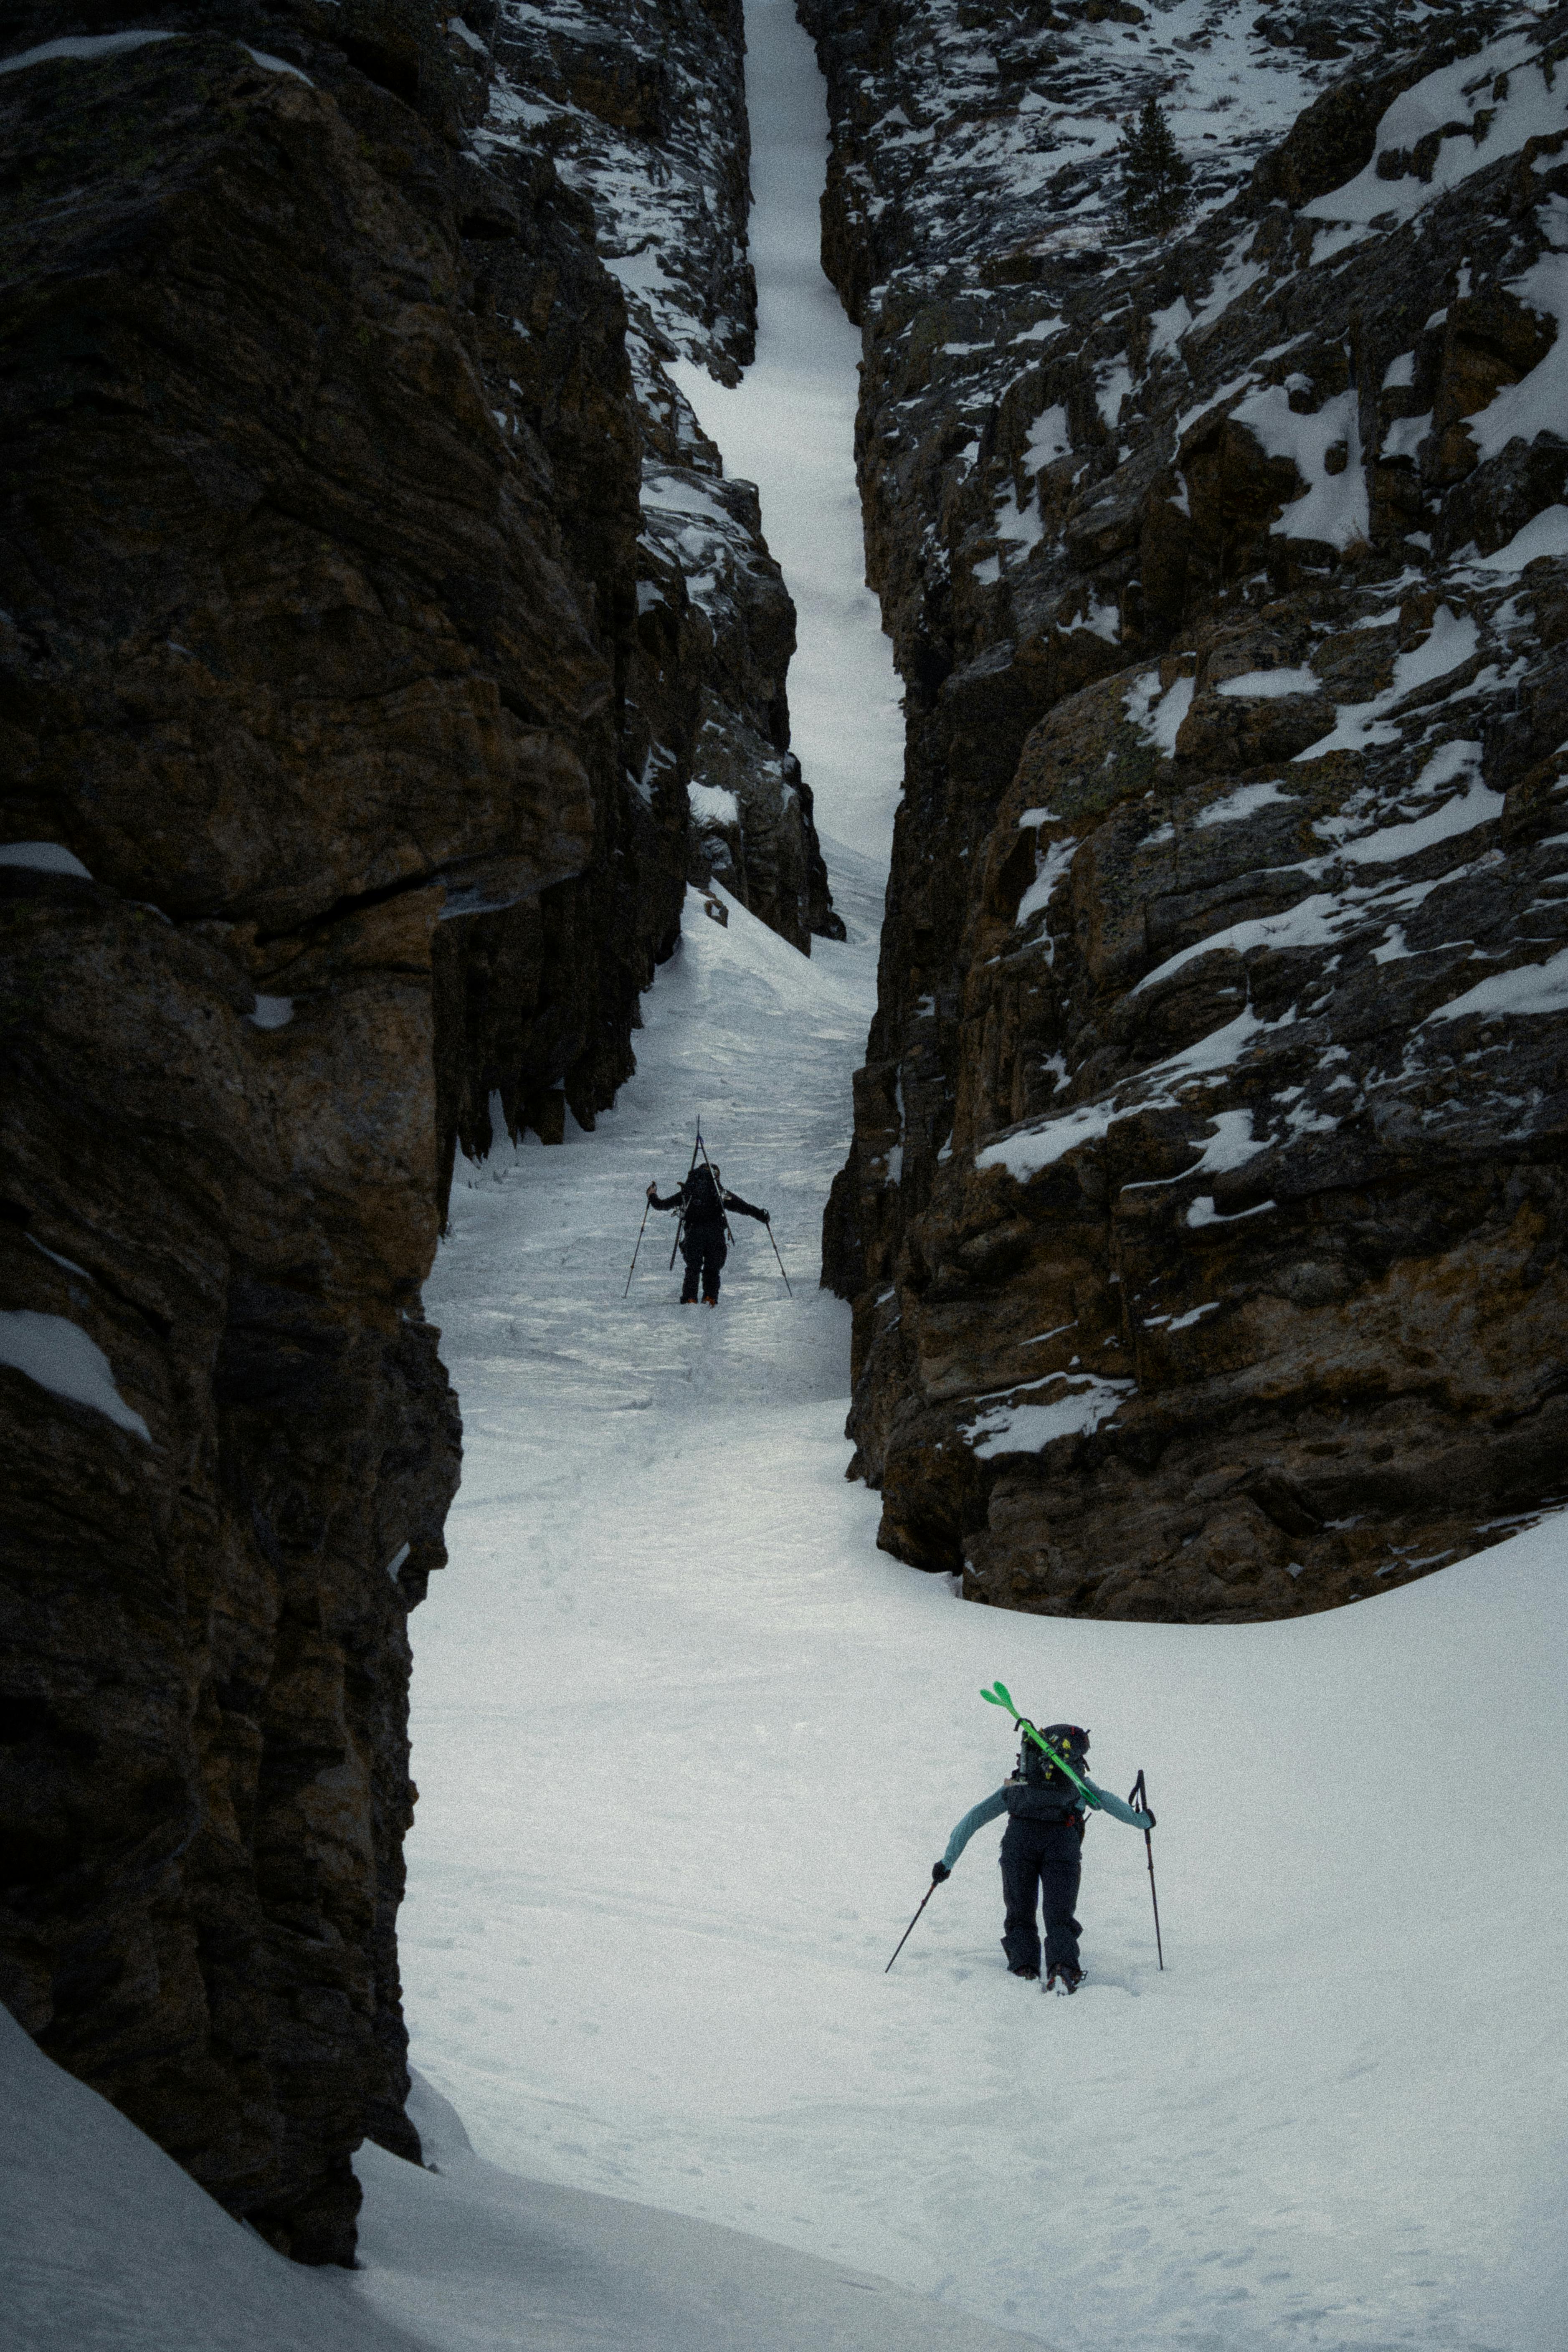 Two skiers in a narrow couloir